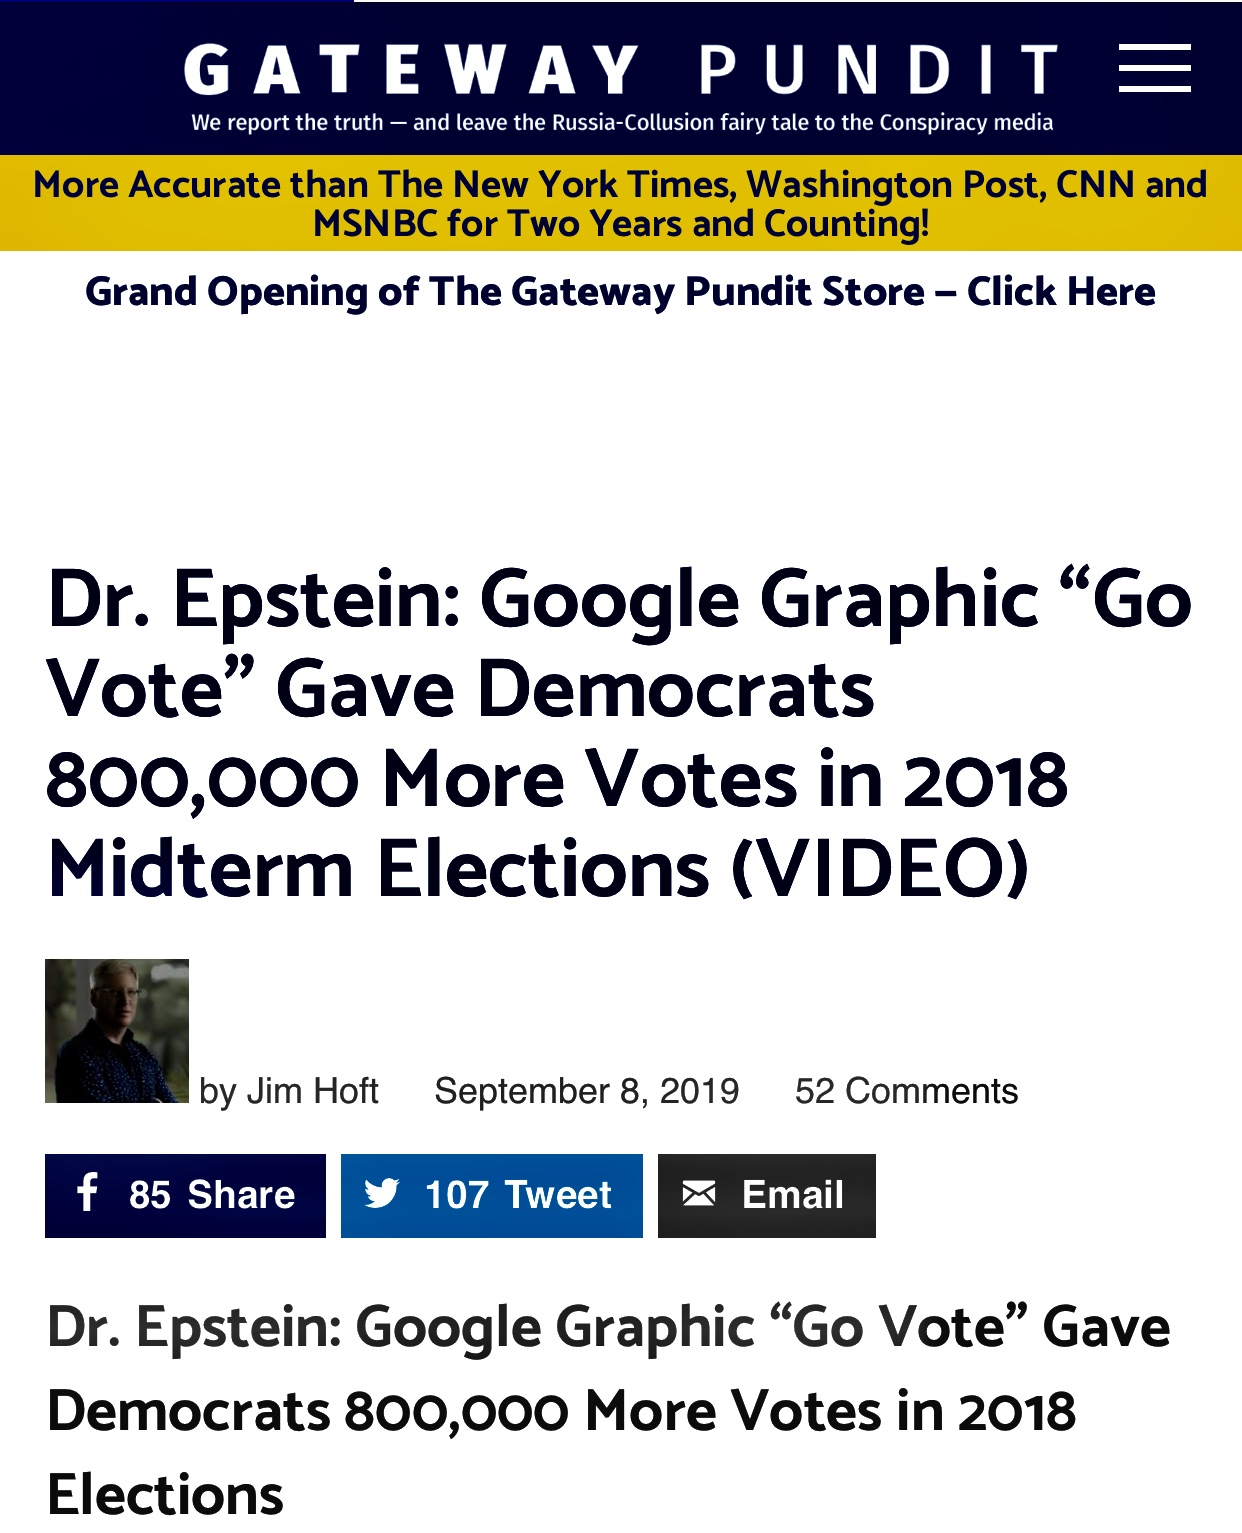 Dr. Epstein: Google Graphic “Go Vote” Gave Democrats 800,000 More Votes in 2018 Midterm Elections